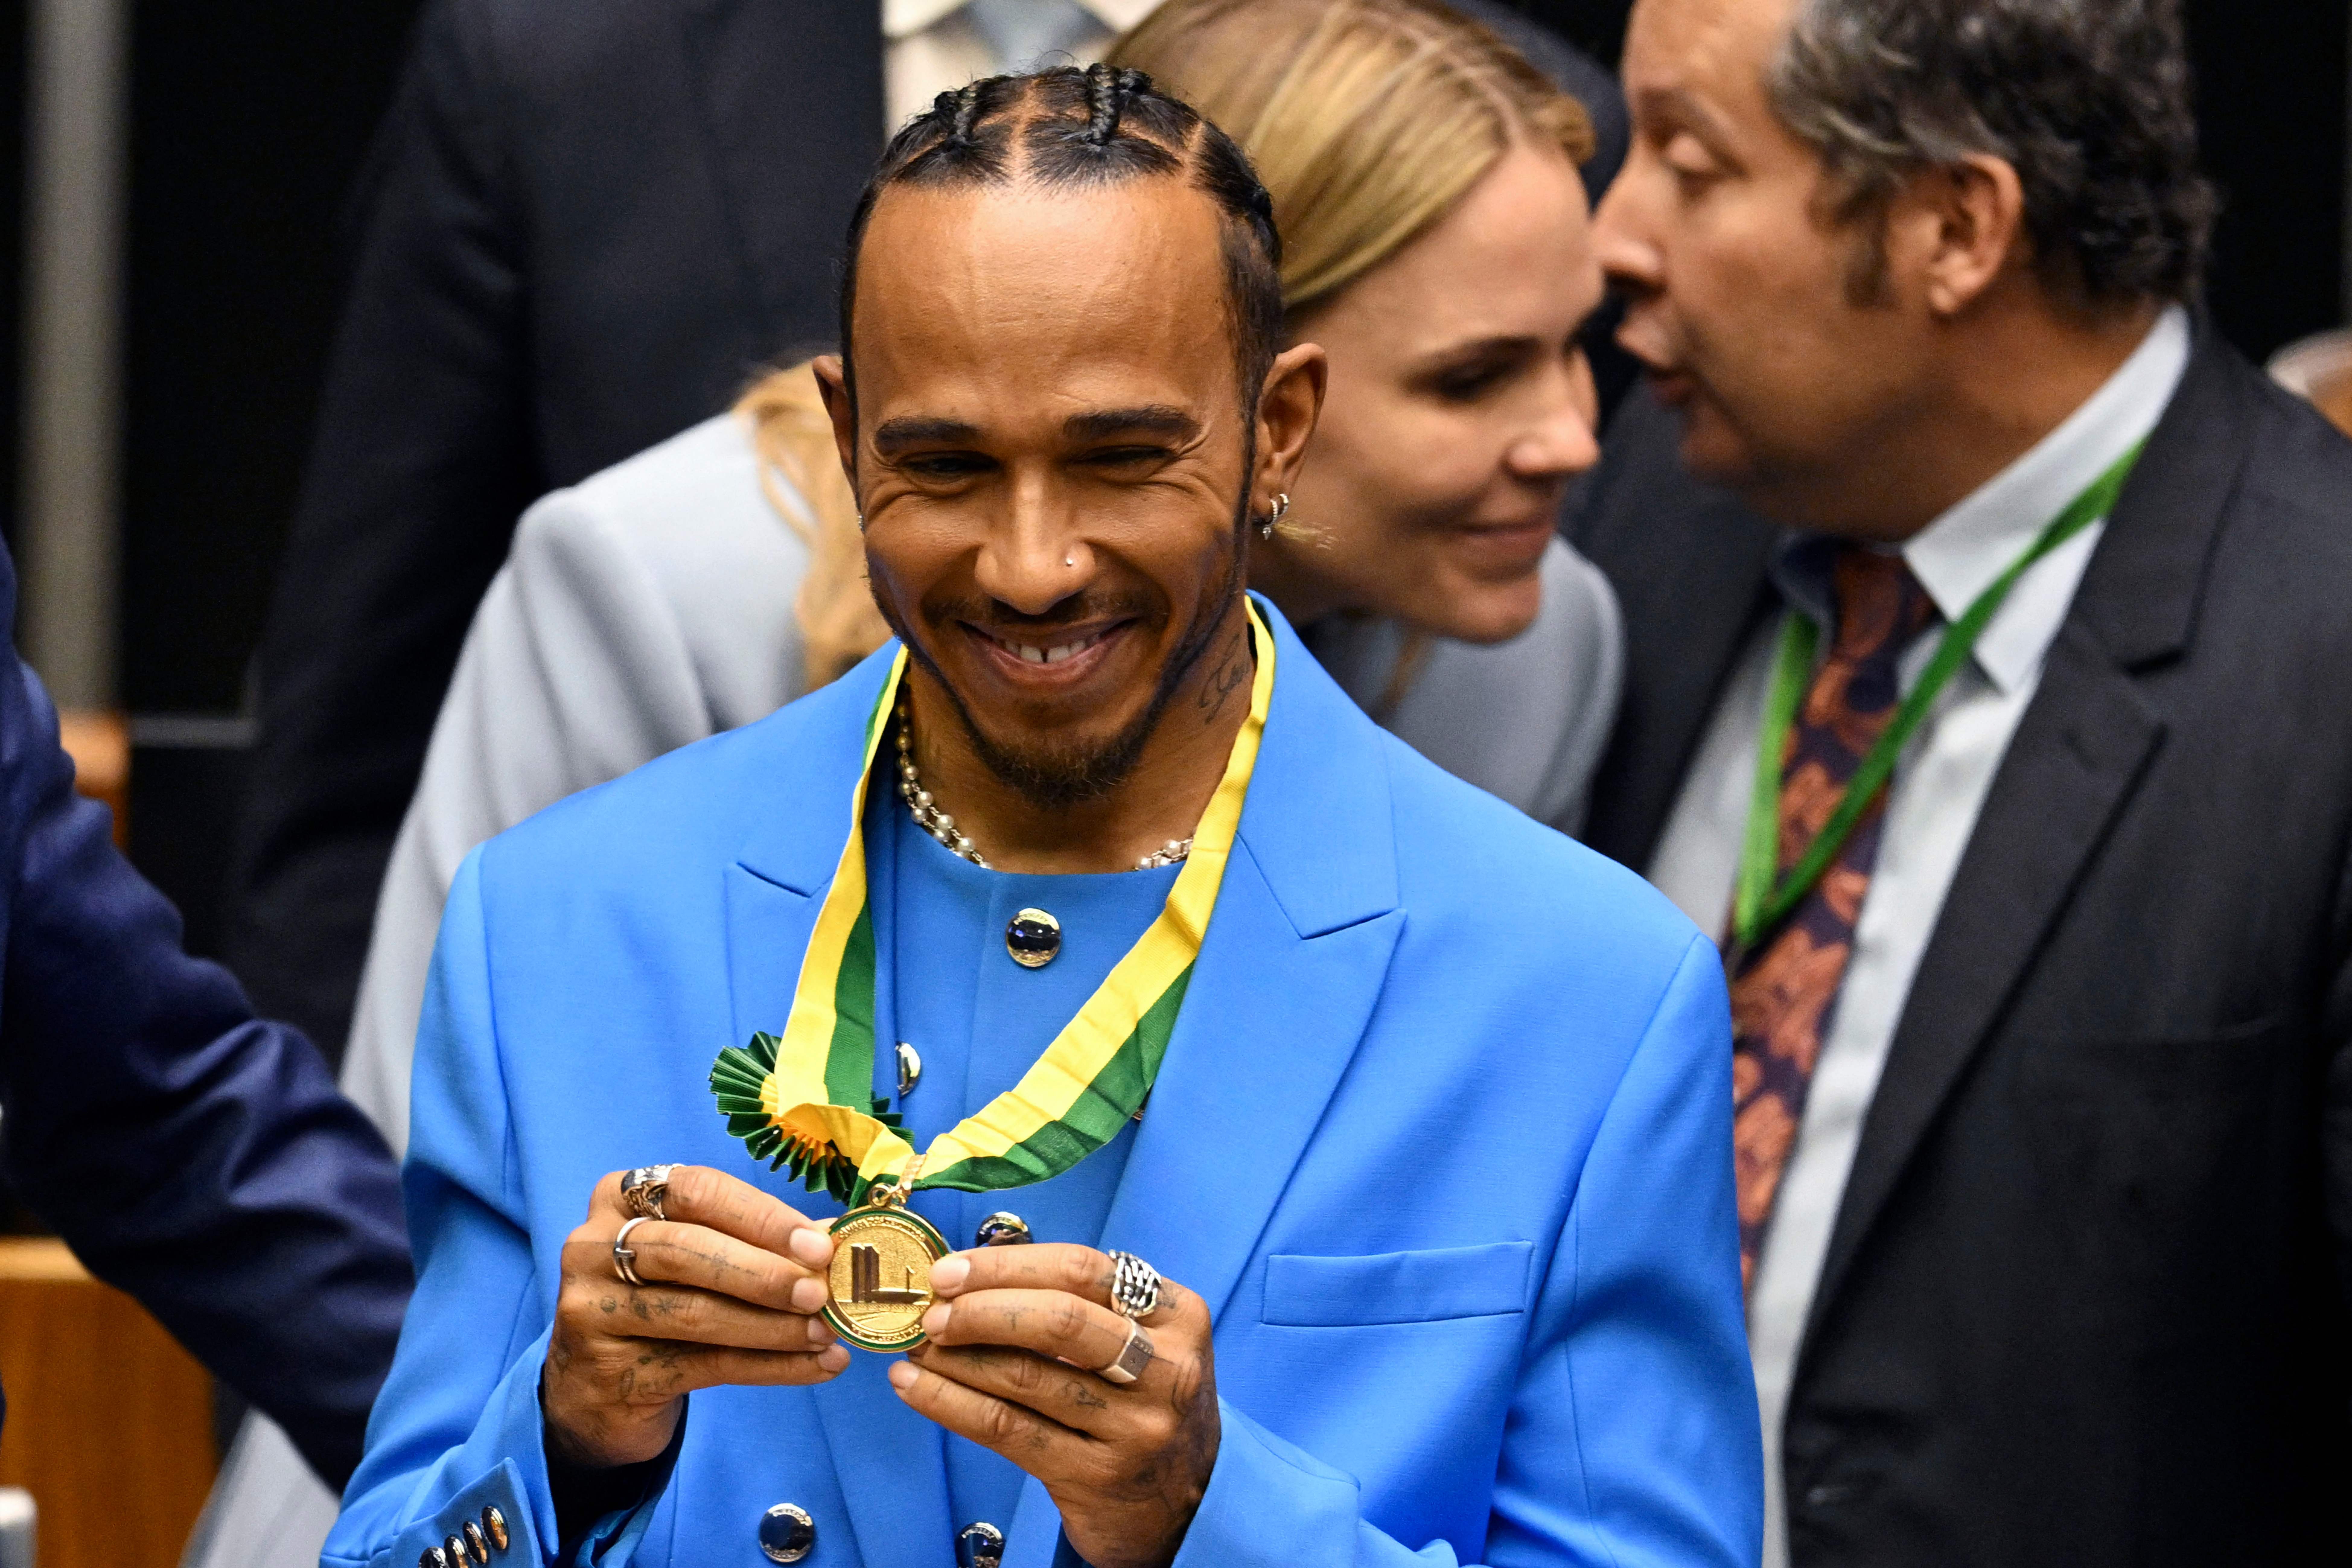 Lewis Hamilton became an honorary citizen of Brazil on Monday